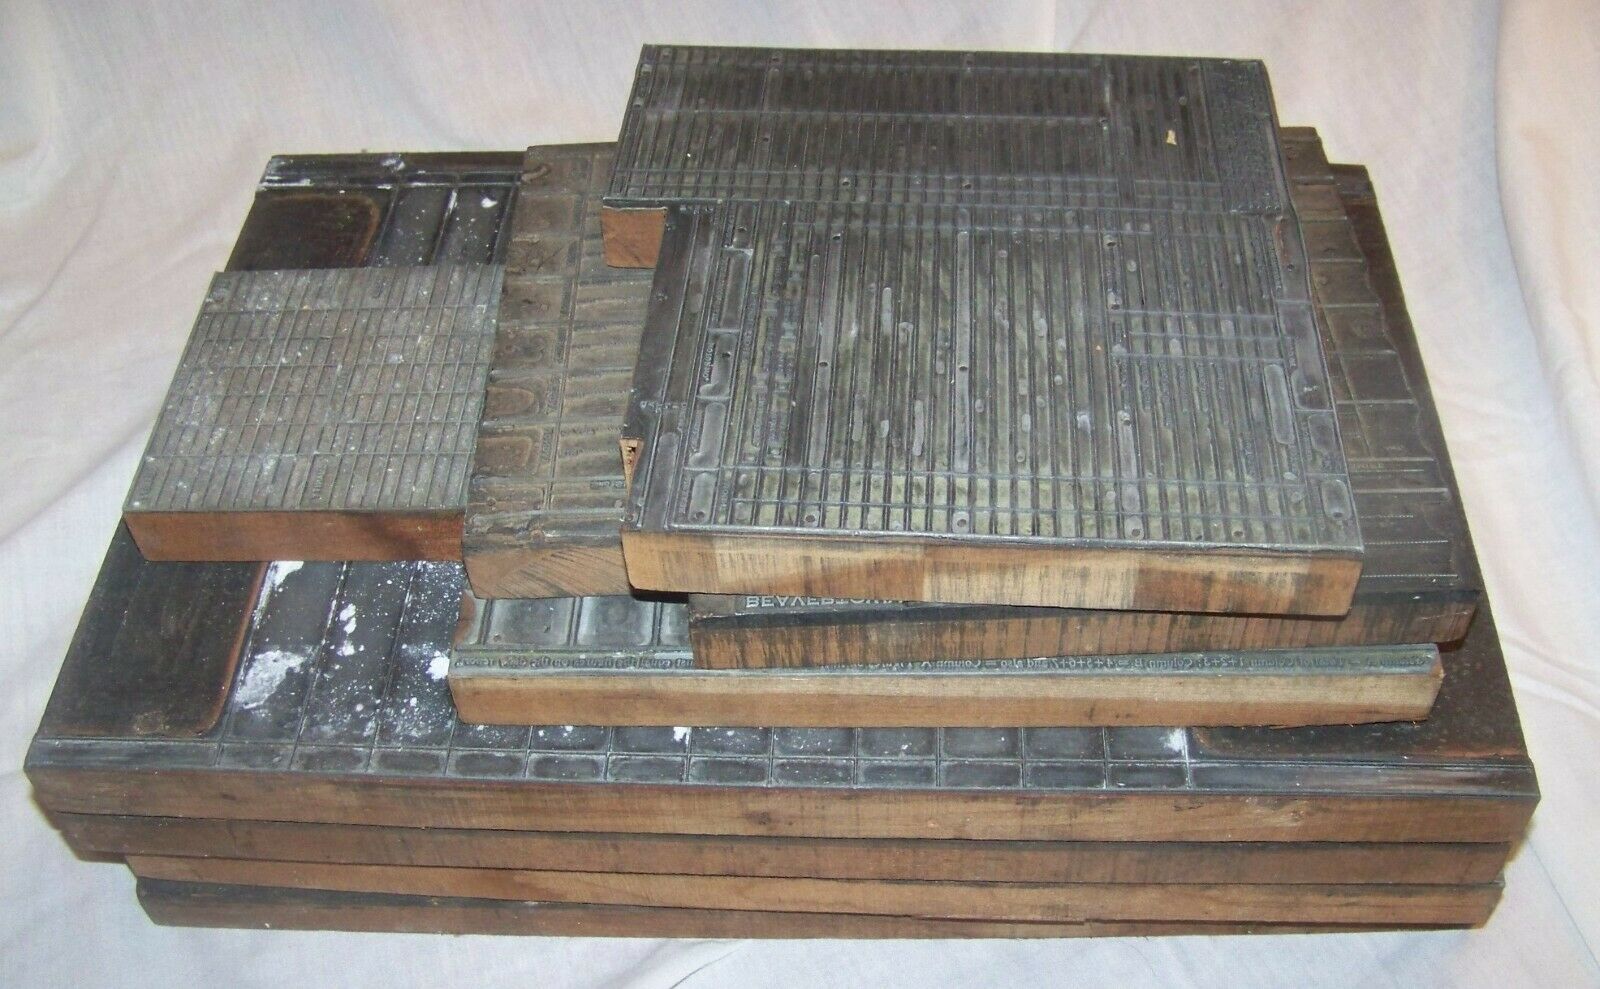 Primary image for LOT 8 ANTIQUE ADVERTISING INDUSTRIAL PRINTERS TYPE BLOCK BEAVERTOWN WEAVING MILL